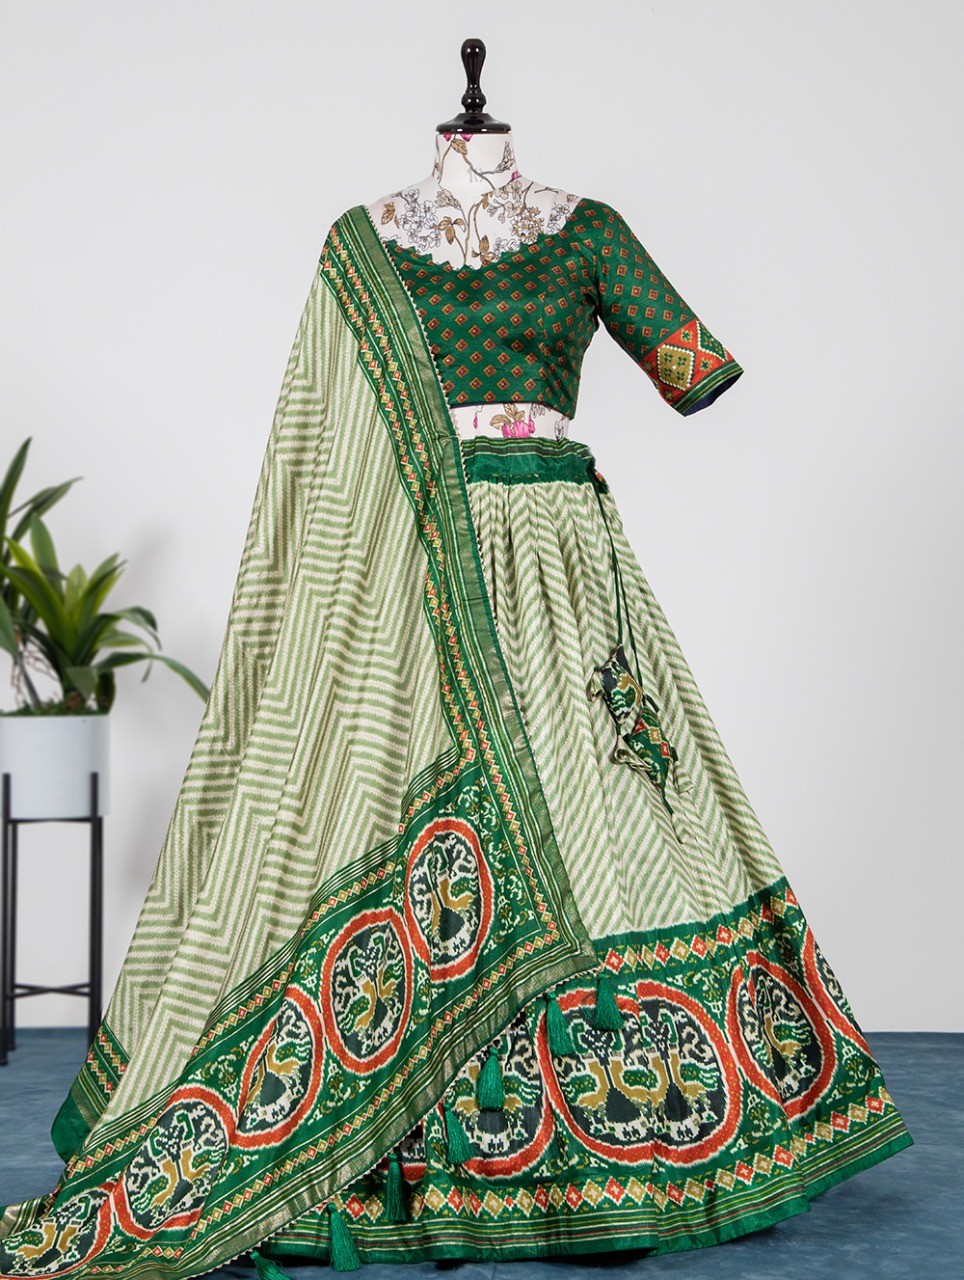 Exclusive Designer Lehnga Choli With Embroidery Work In Roayal Blue